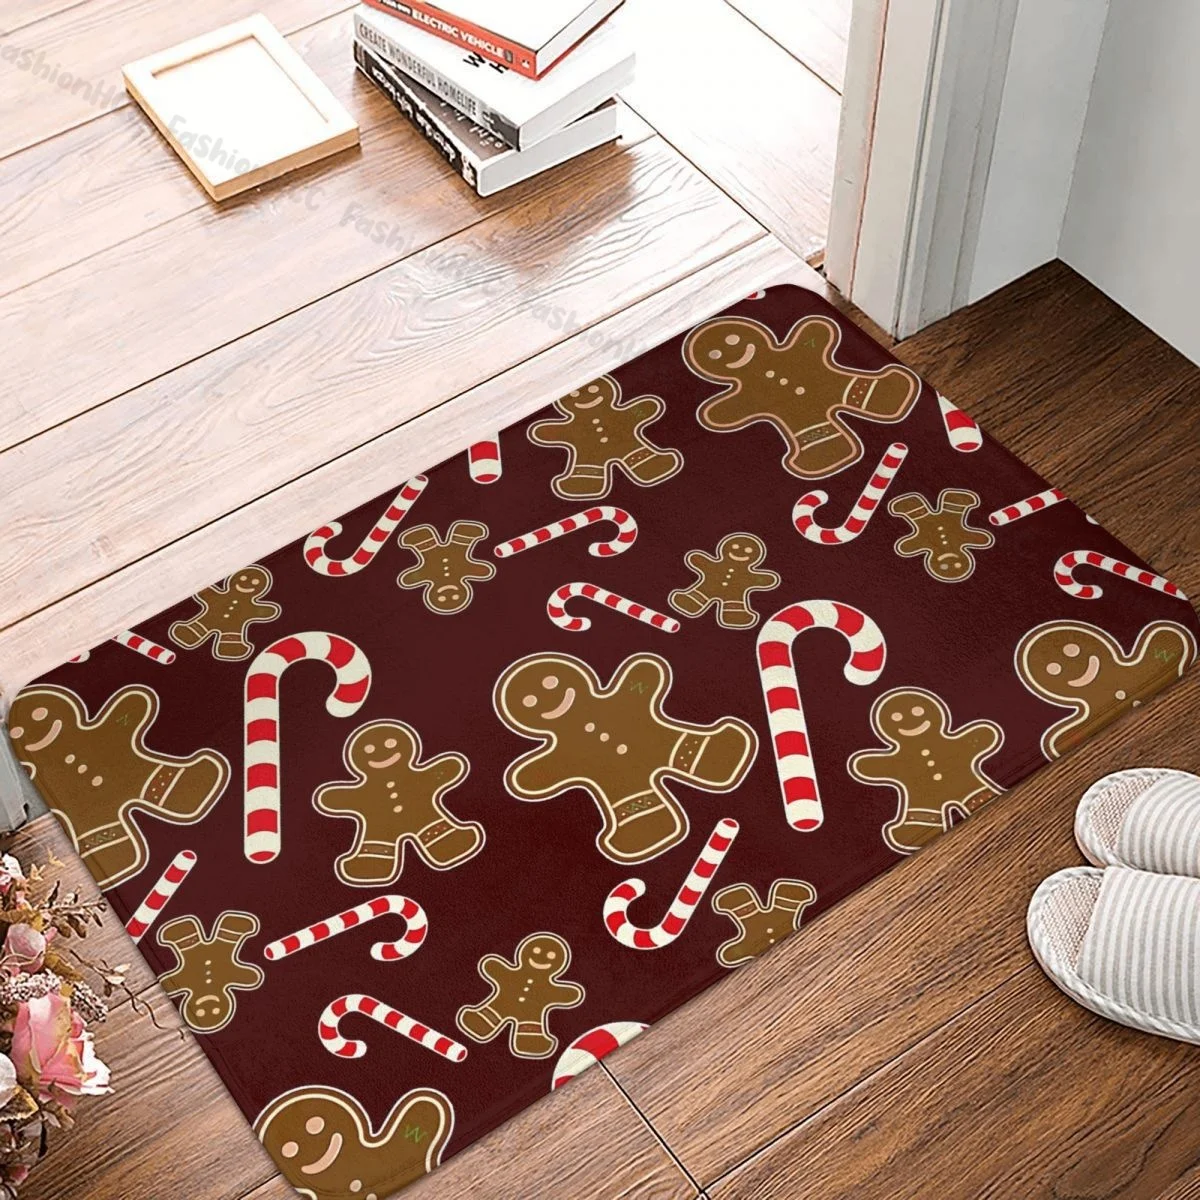 

Merry Christmas Bath Mat Christmas Candy Cane And Gingerbread Man Doormat Flannel Carpet Entrance Door Rug Home Decor